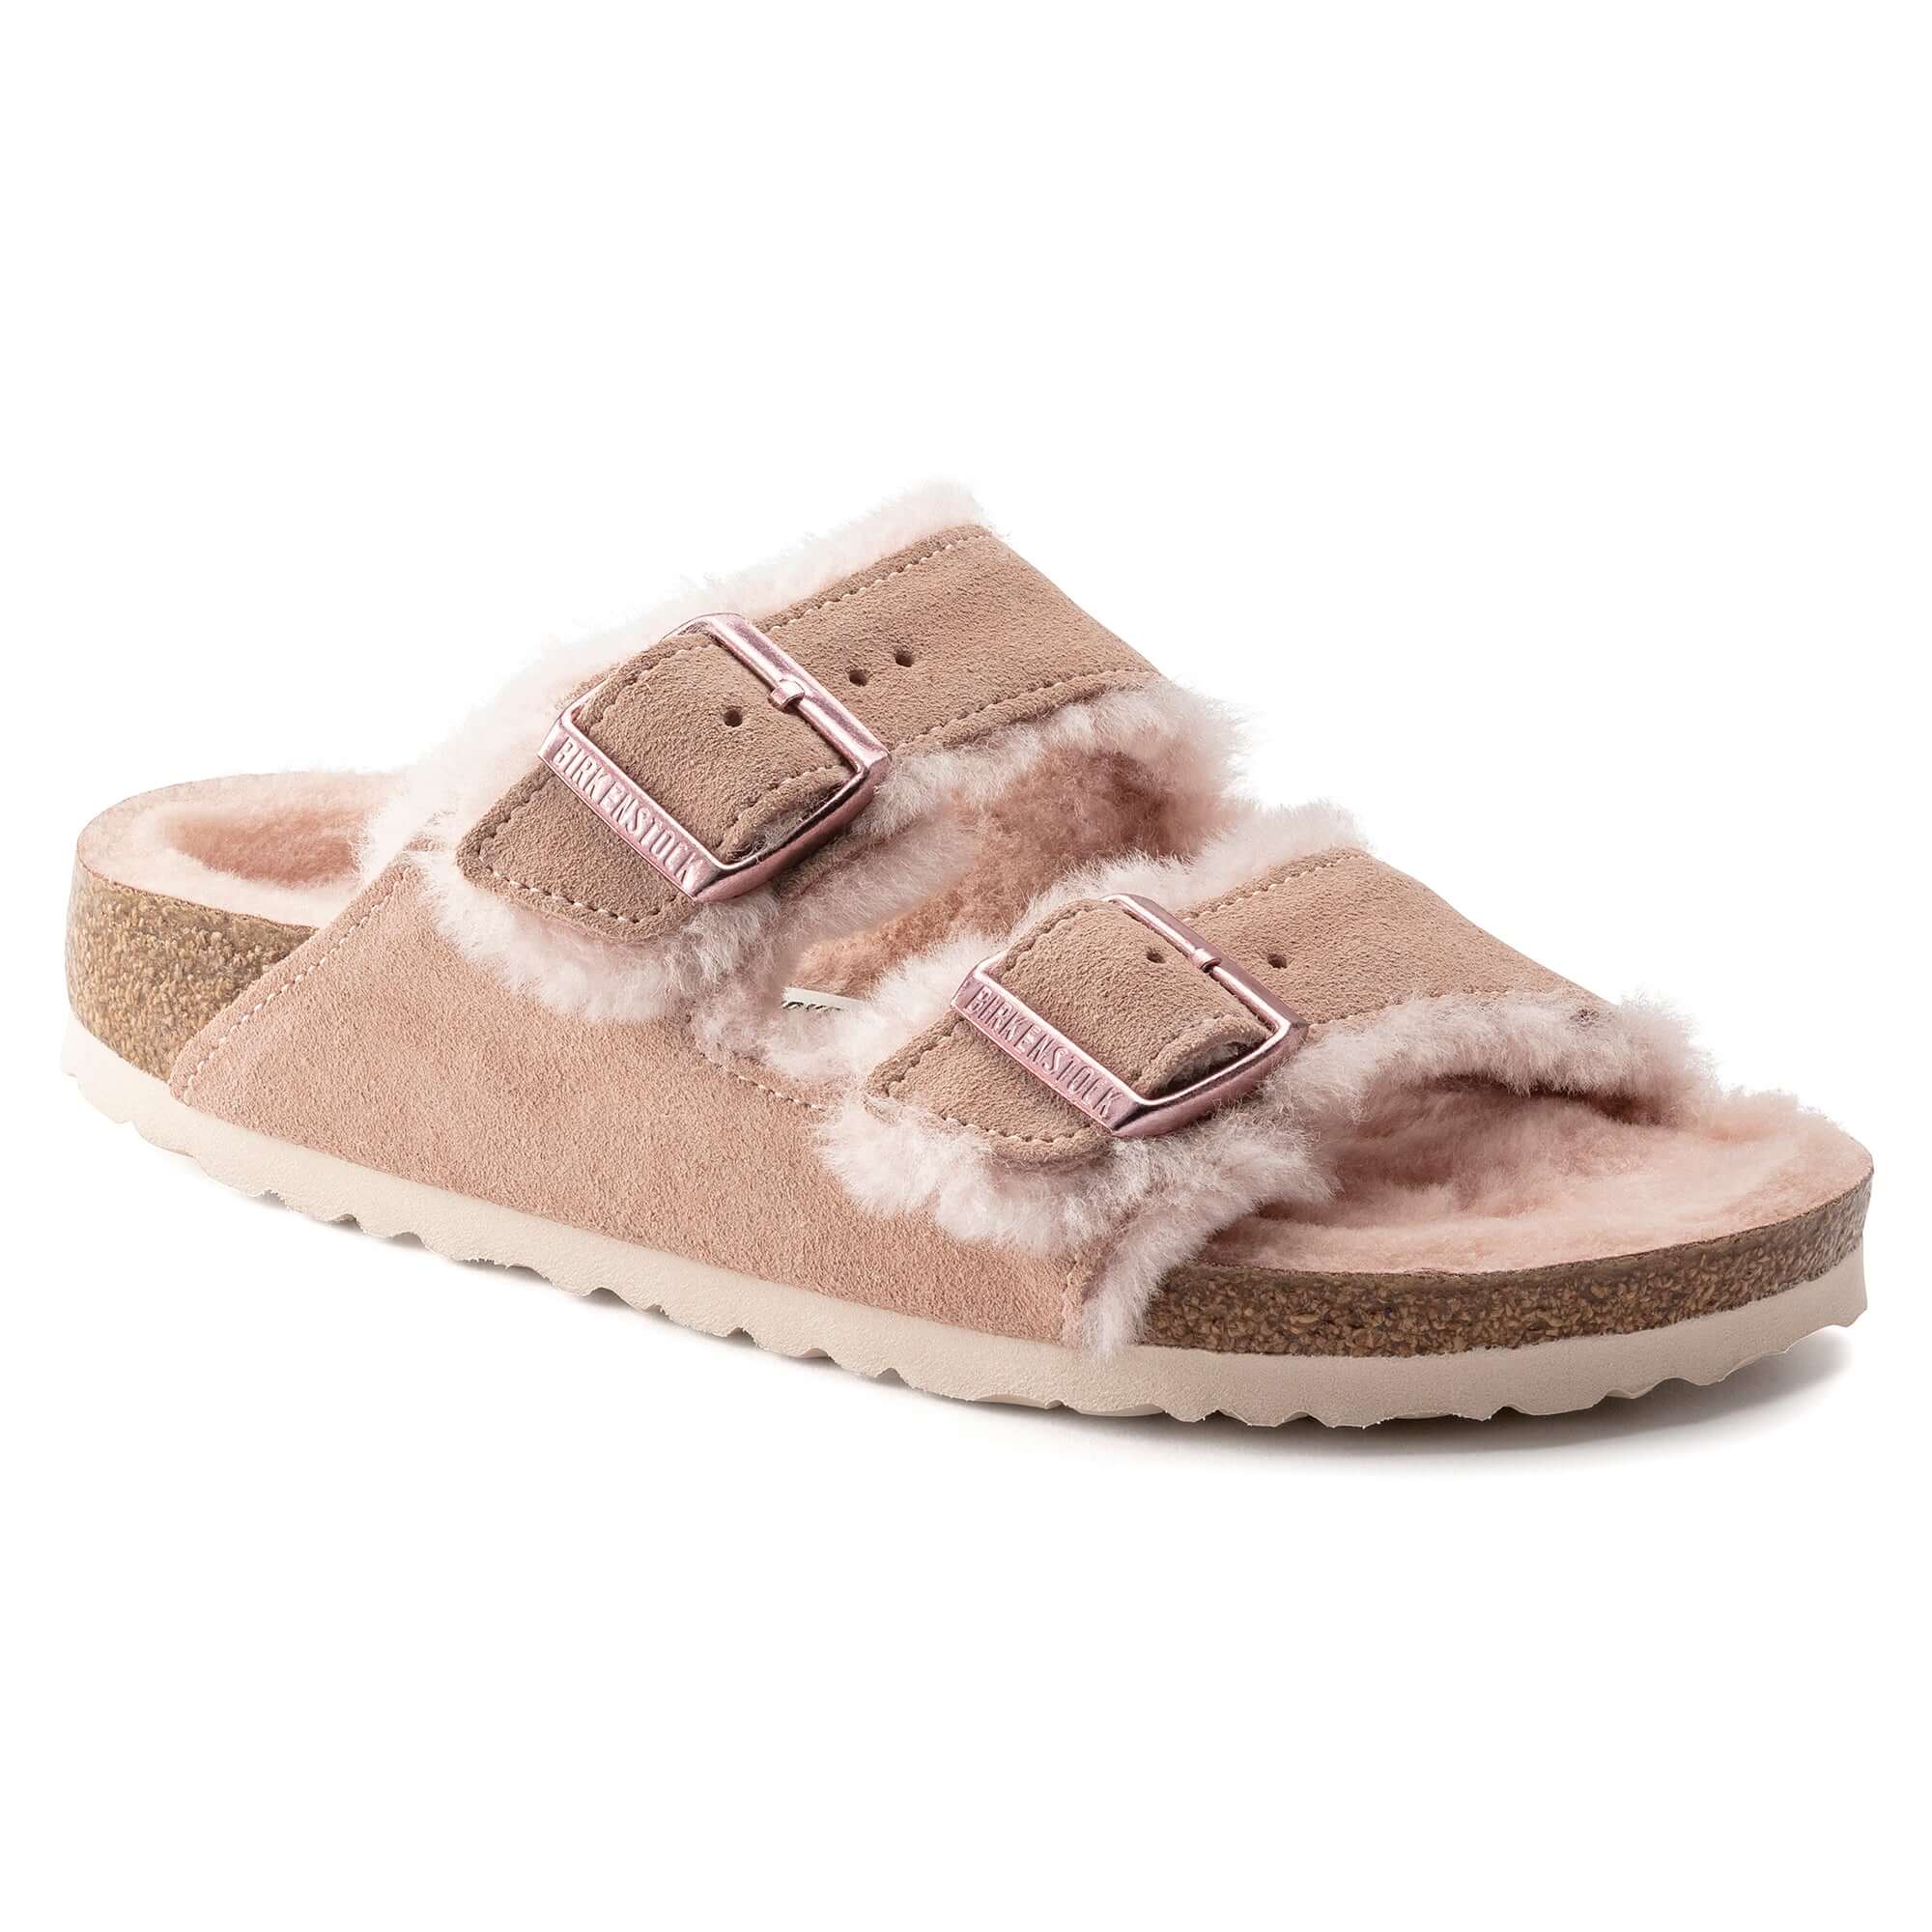 Pink fuzzy slide sandal with two adjustable straps and cork sole for comfort.